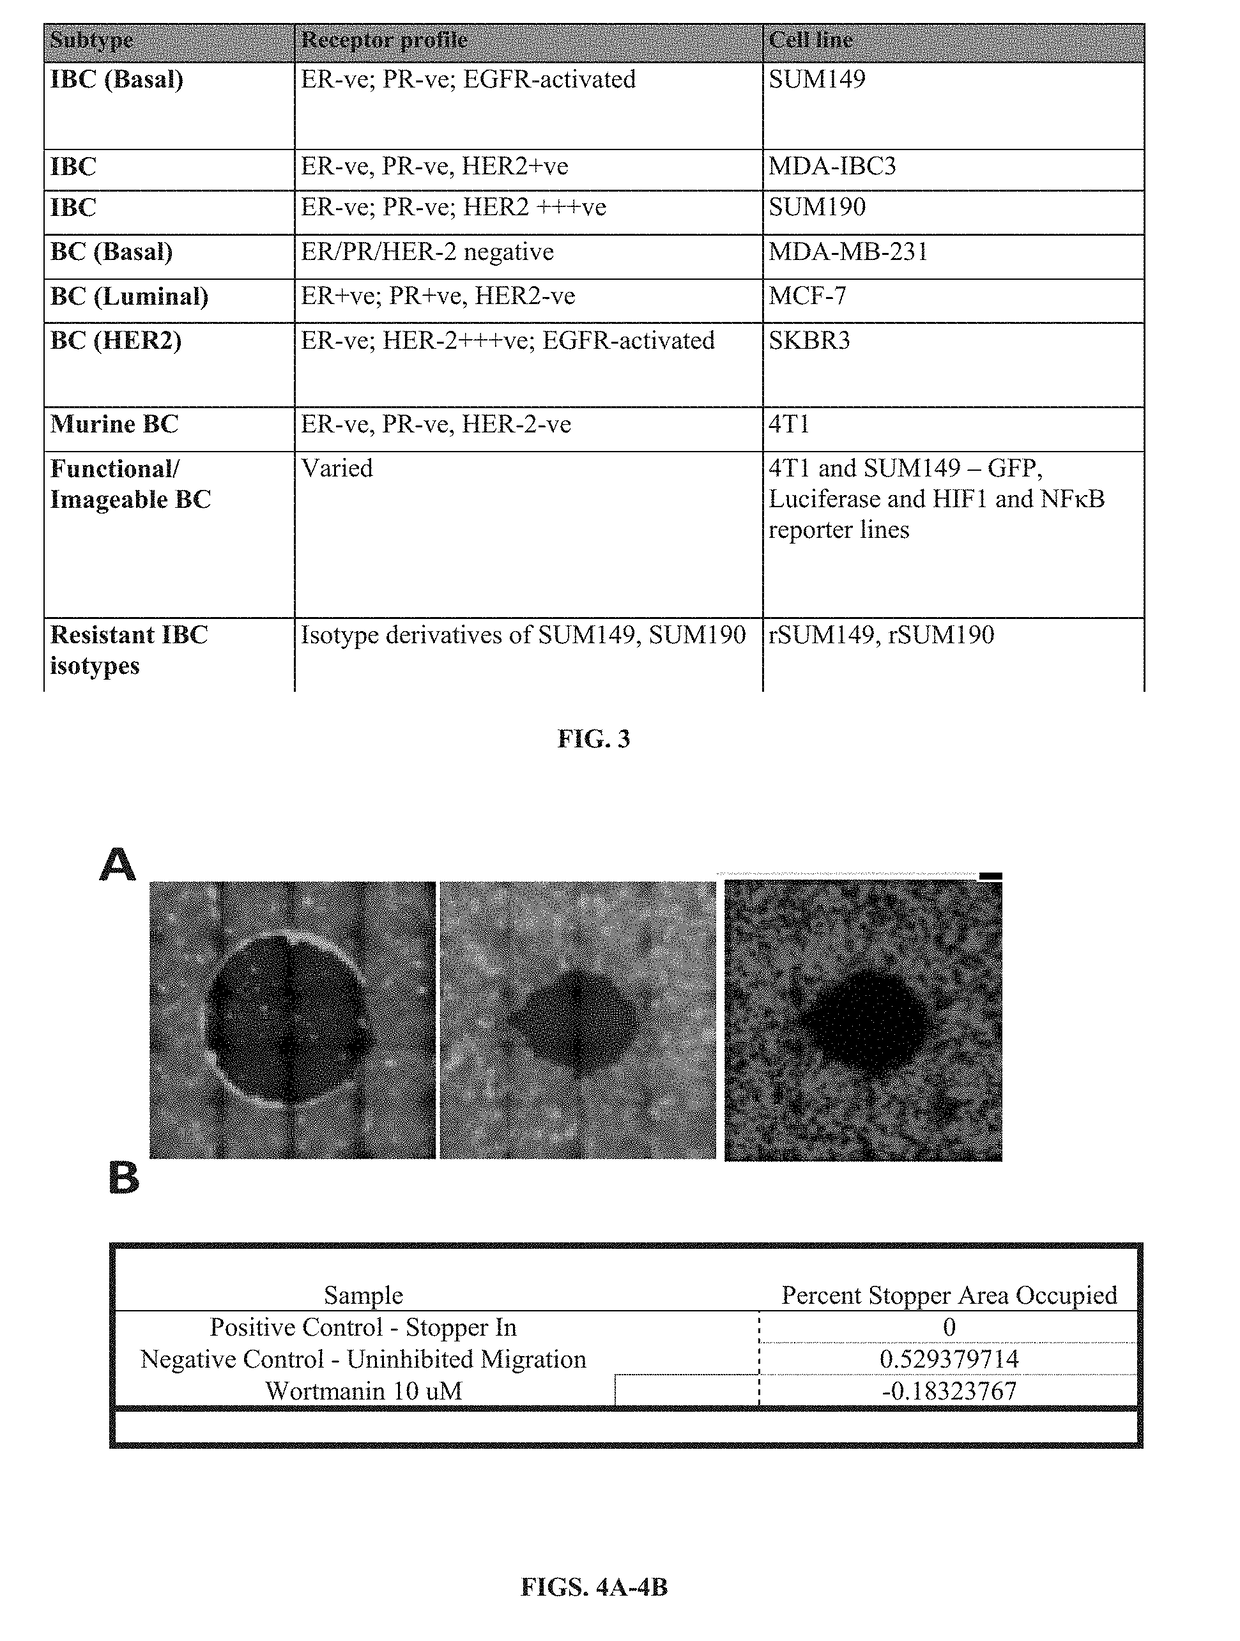 Methods for Quantitative Analysis and Targeting of Inflammatory Breast Cancer Tumor Emboli